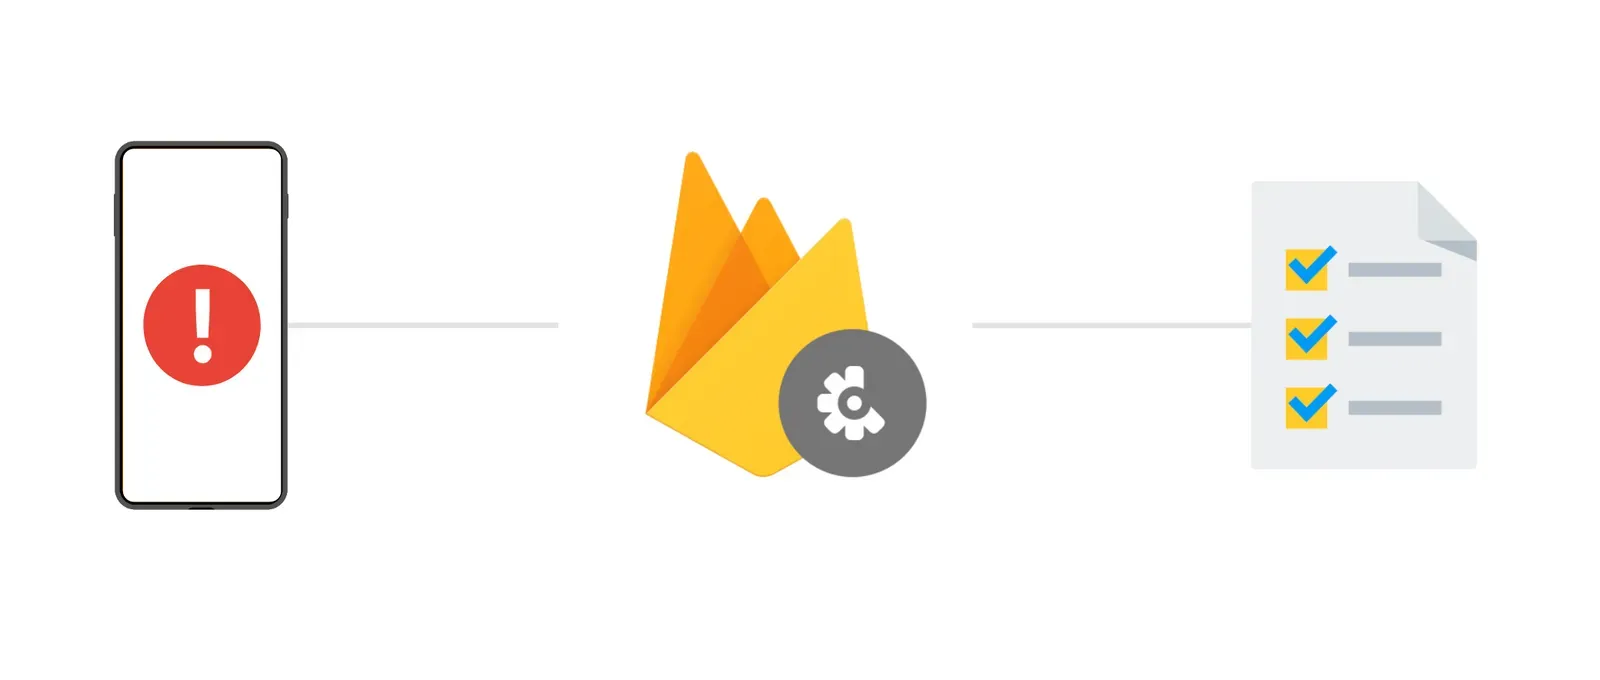 Use Firebase more seamlessly with Flutter to build high quality apps that reach users across platforms with the least amount of hassle and code